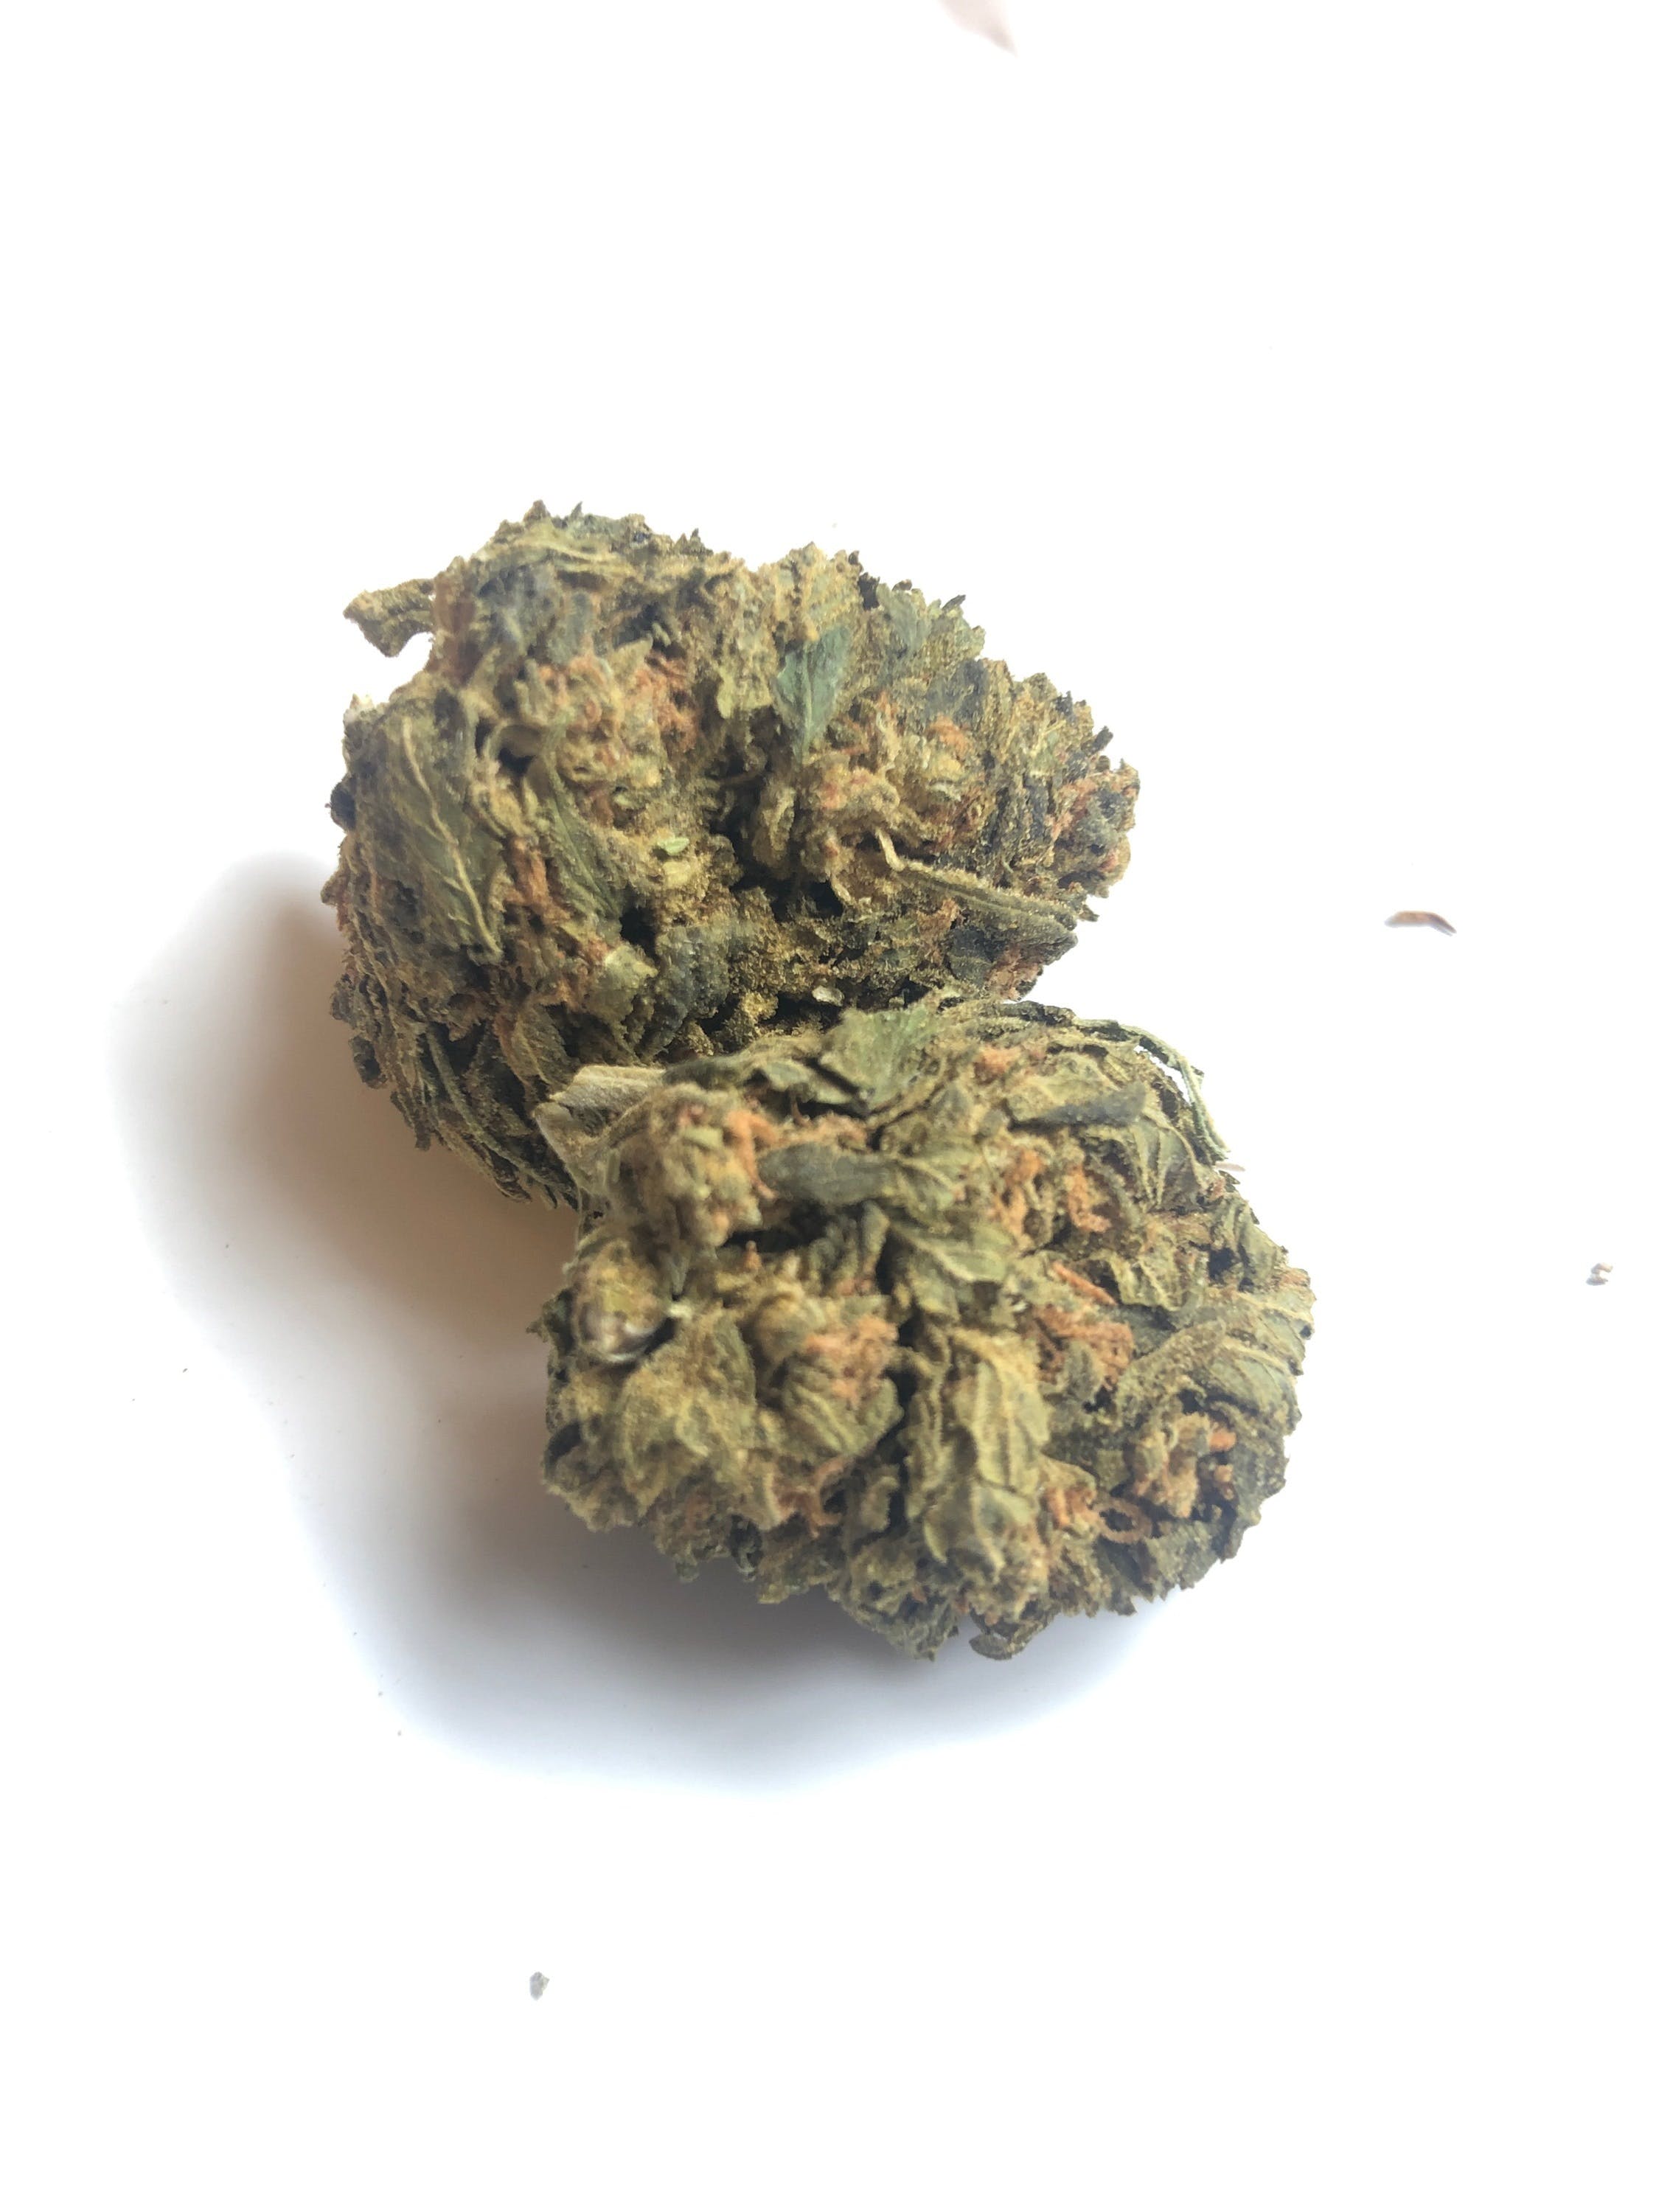 marijuana-dispensaries-by-appointment-only-2c-call-to-verify-fresno-big-buds-24100-ounce-special